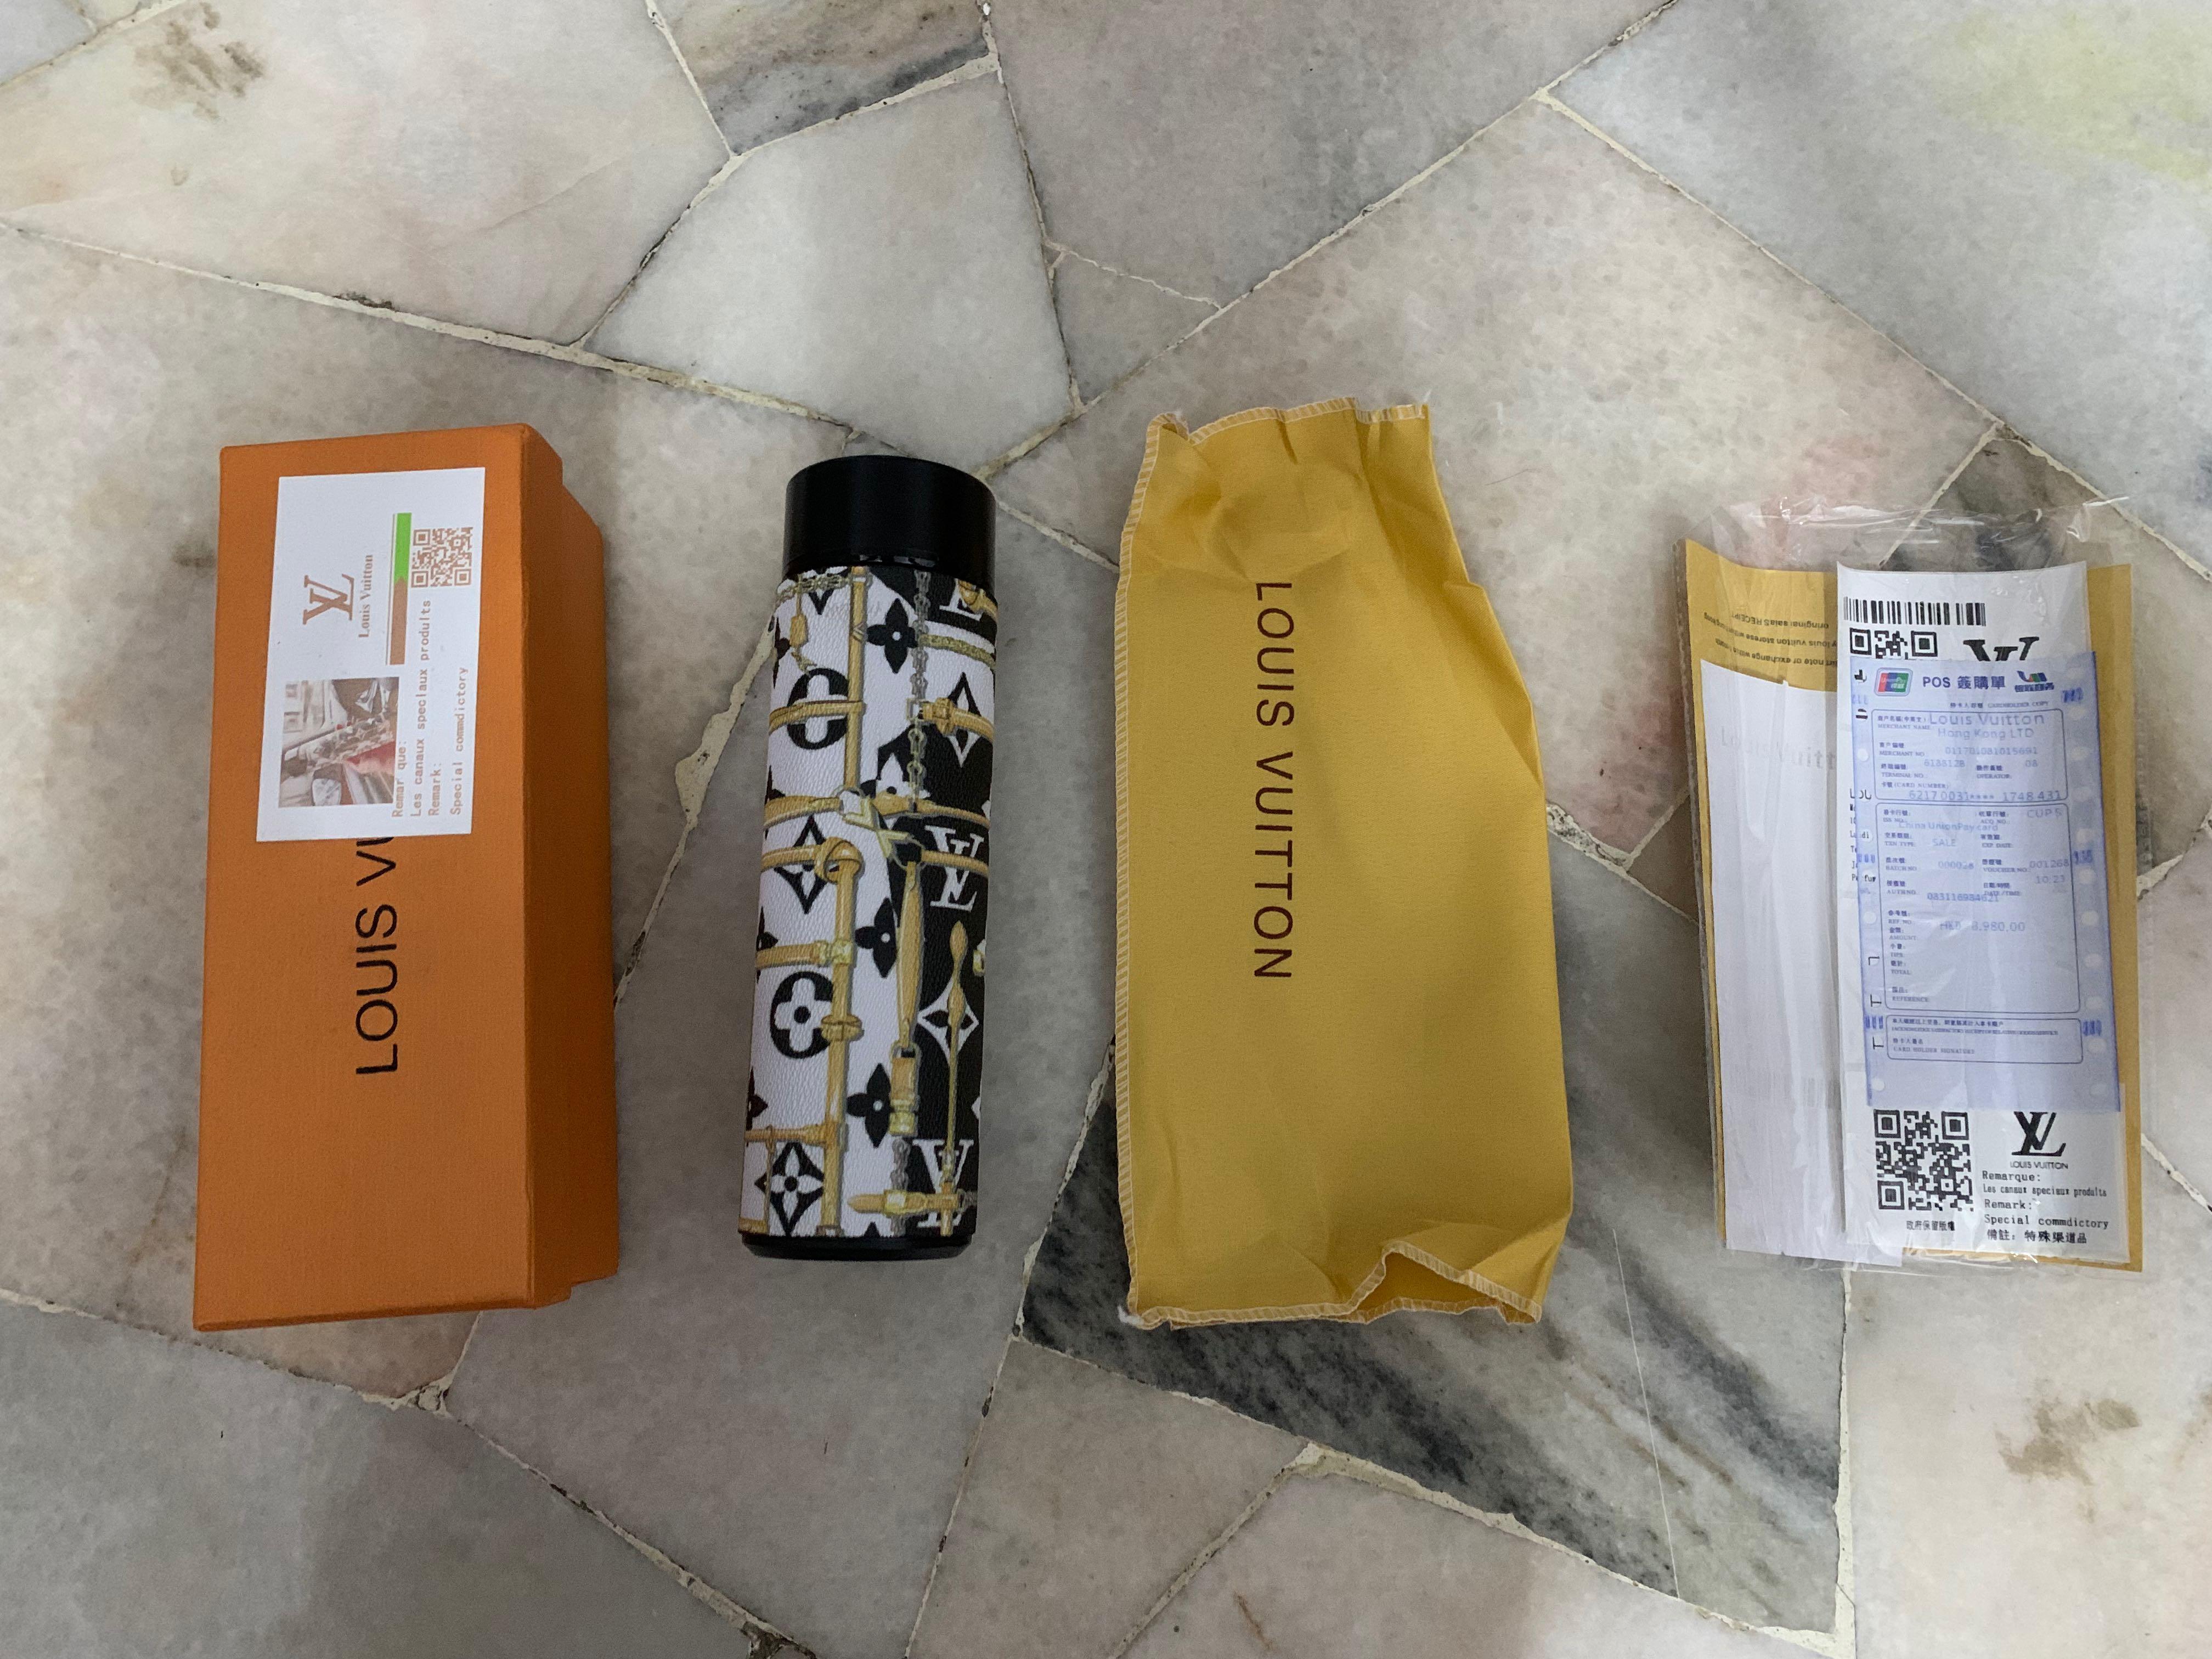 Lv thermos, Luxury, Accessories on Carousell